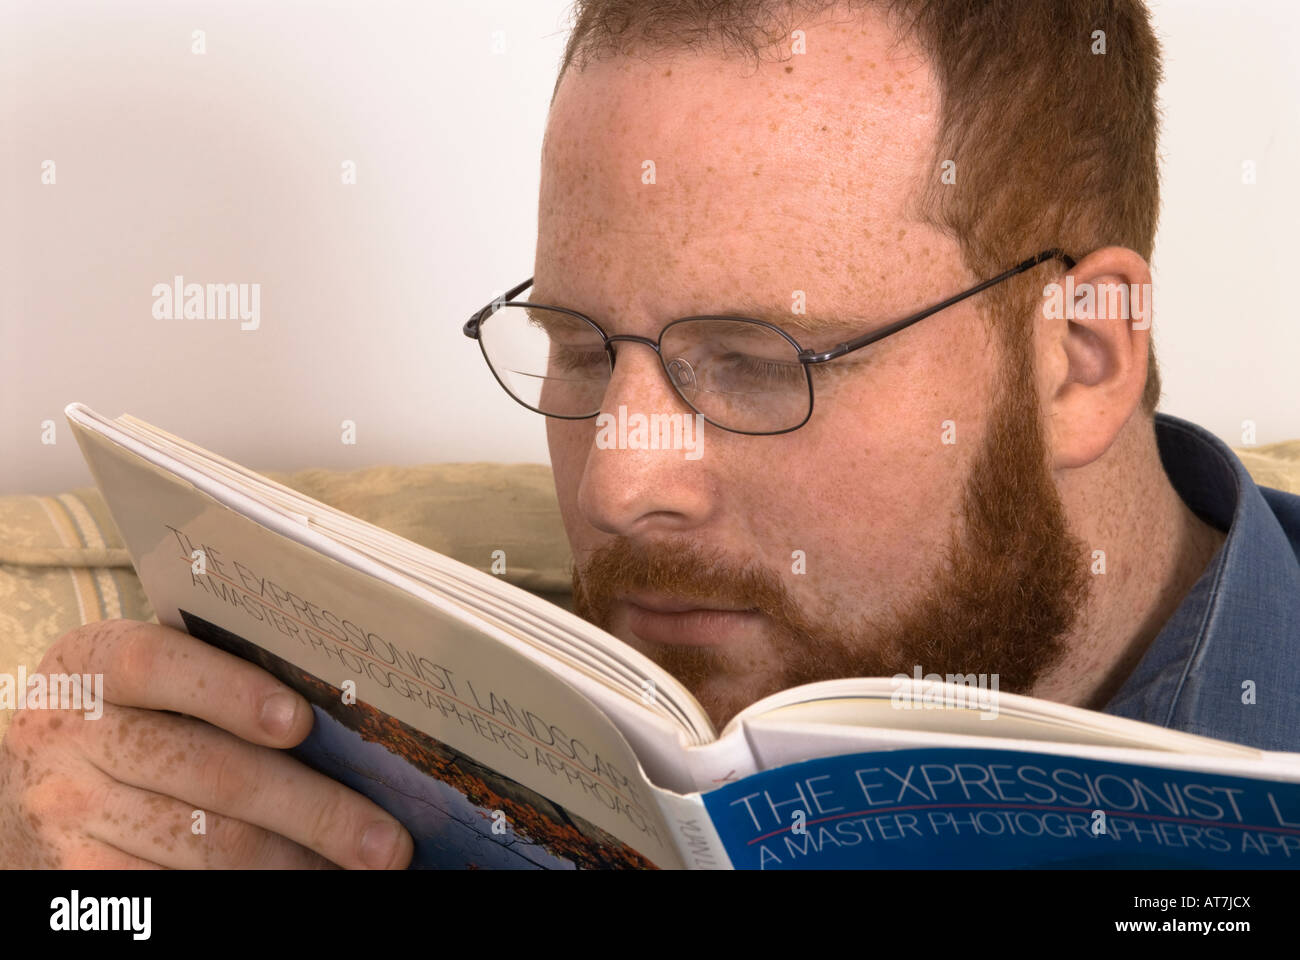 young man with poor eyesight wearing glasses straining eyes to read book, incorrect spectacles, too close to book Stock Photo